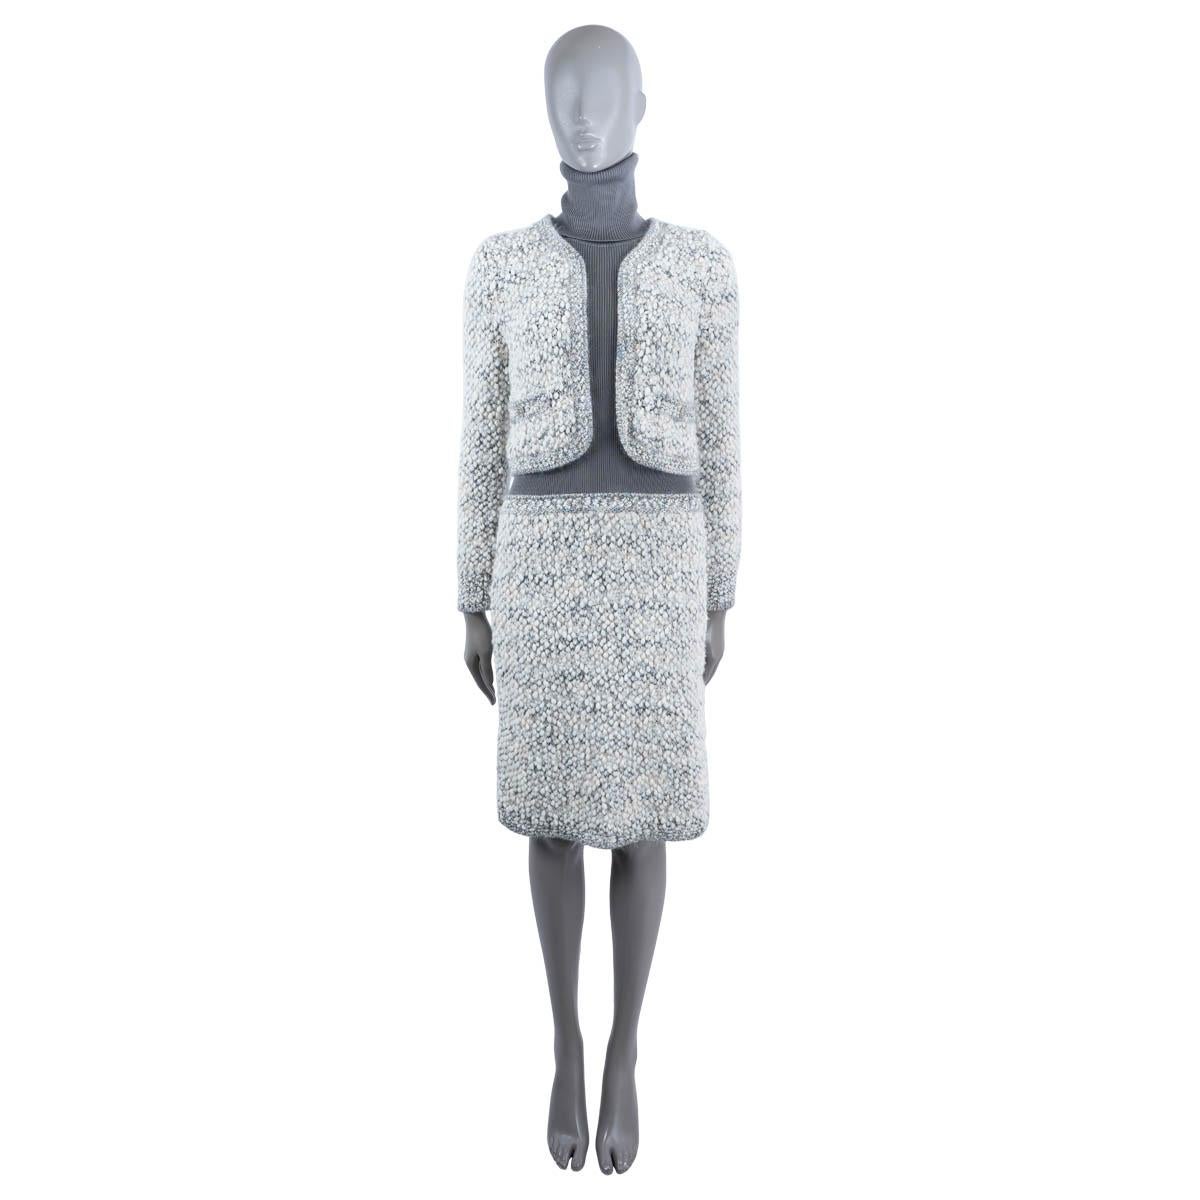 100% authentic Chanel layered dress in dark grey rib-knit wool and ivory and grey tweed silk (38%), wool (36%), nylon (13%) and mohair (12%). Features two buttoned pockets at the waist. Unlined. Has been worn and is in excellent condition.

2016